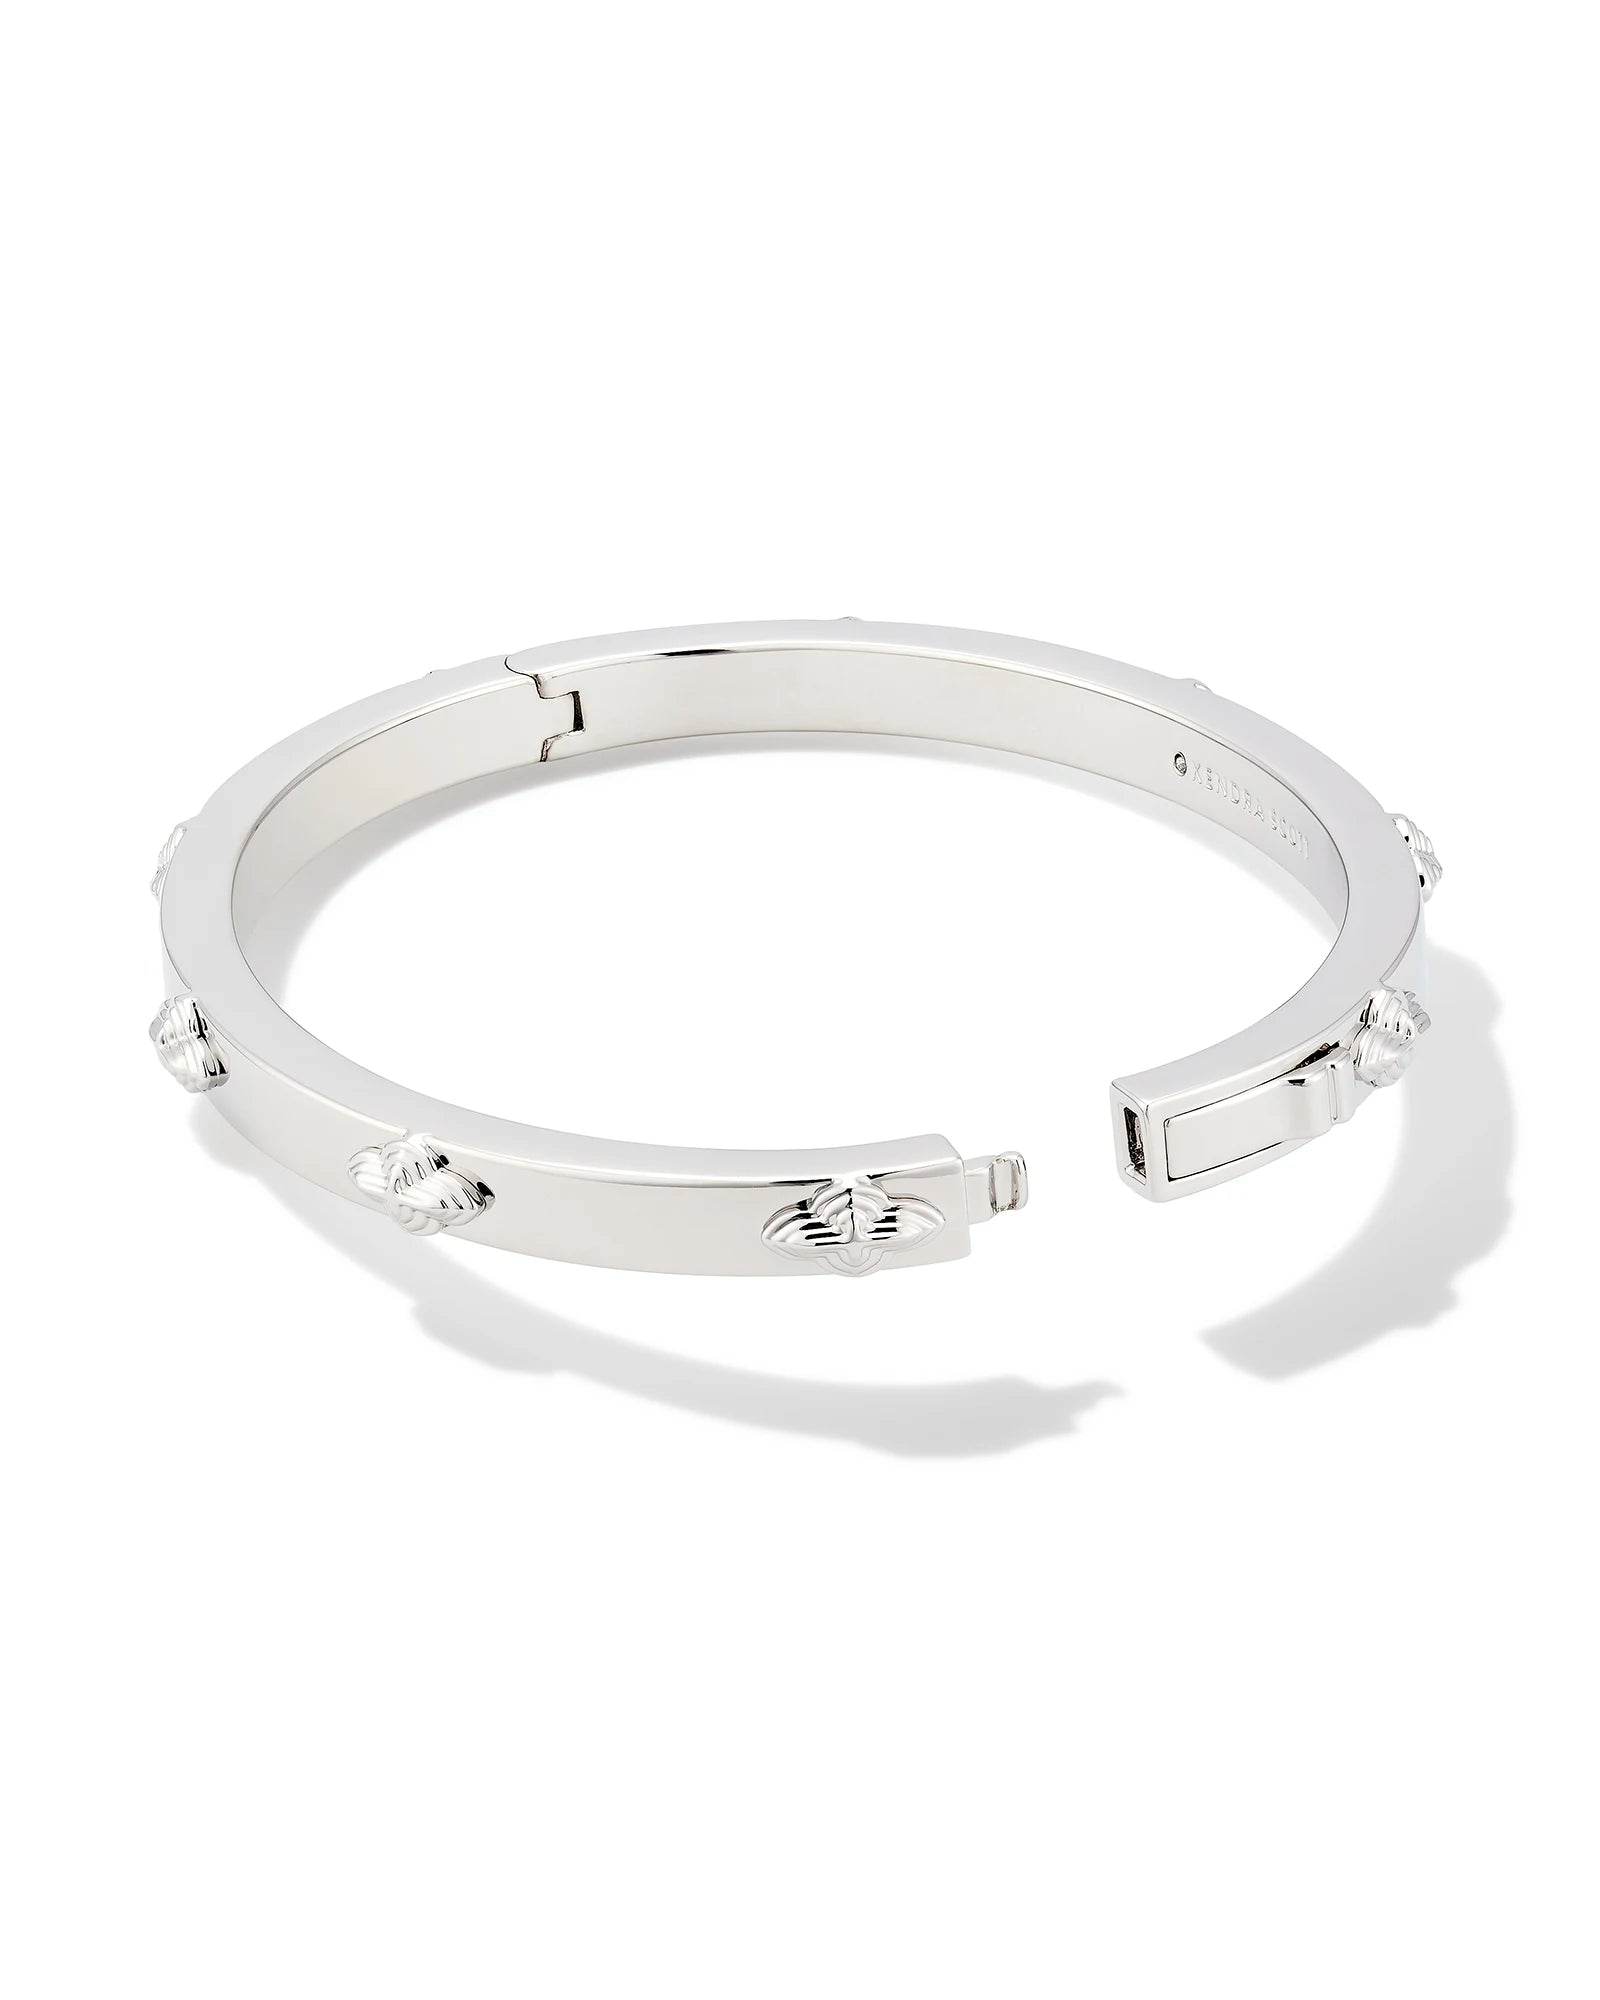 Kendra Scott | Abbie Metal Bangle Bracelet in Silver - Giddy Up Glamour Boutique